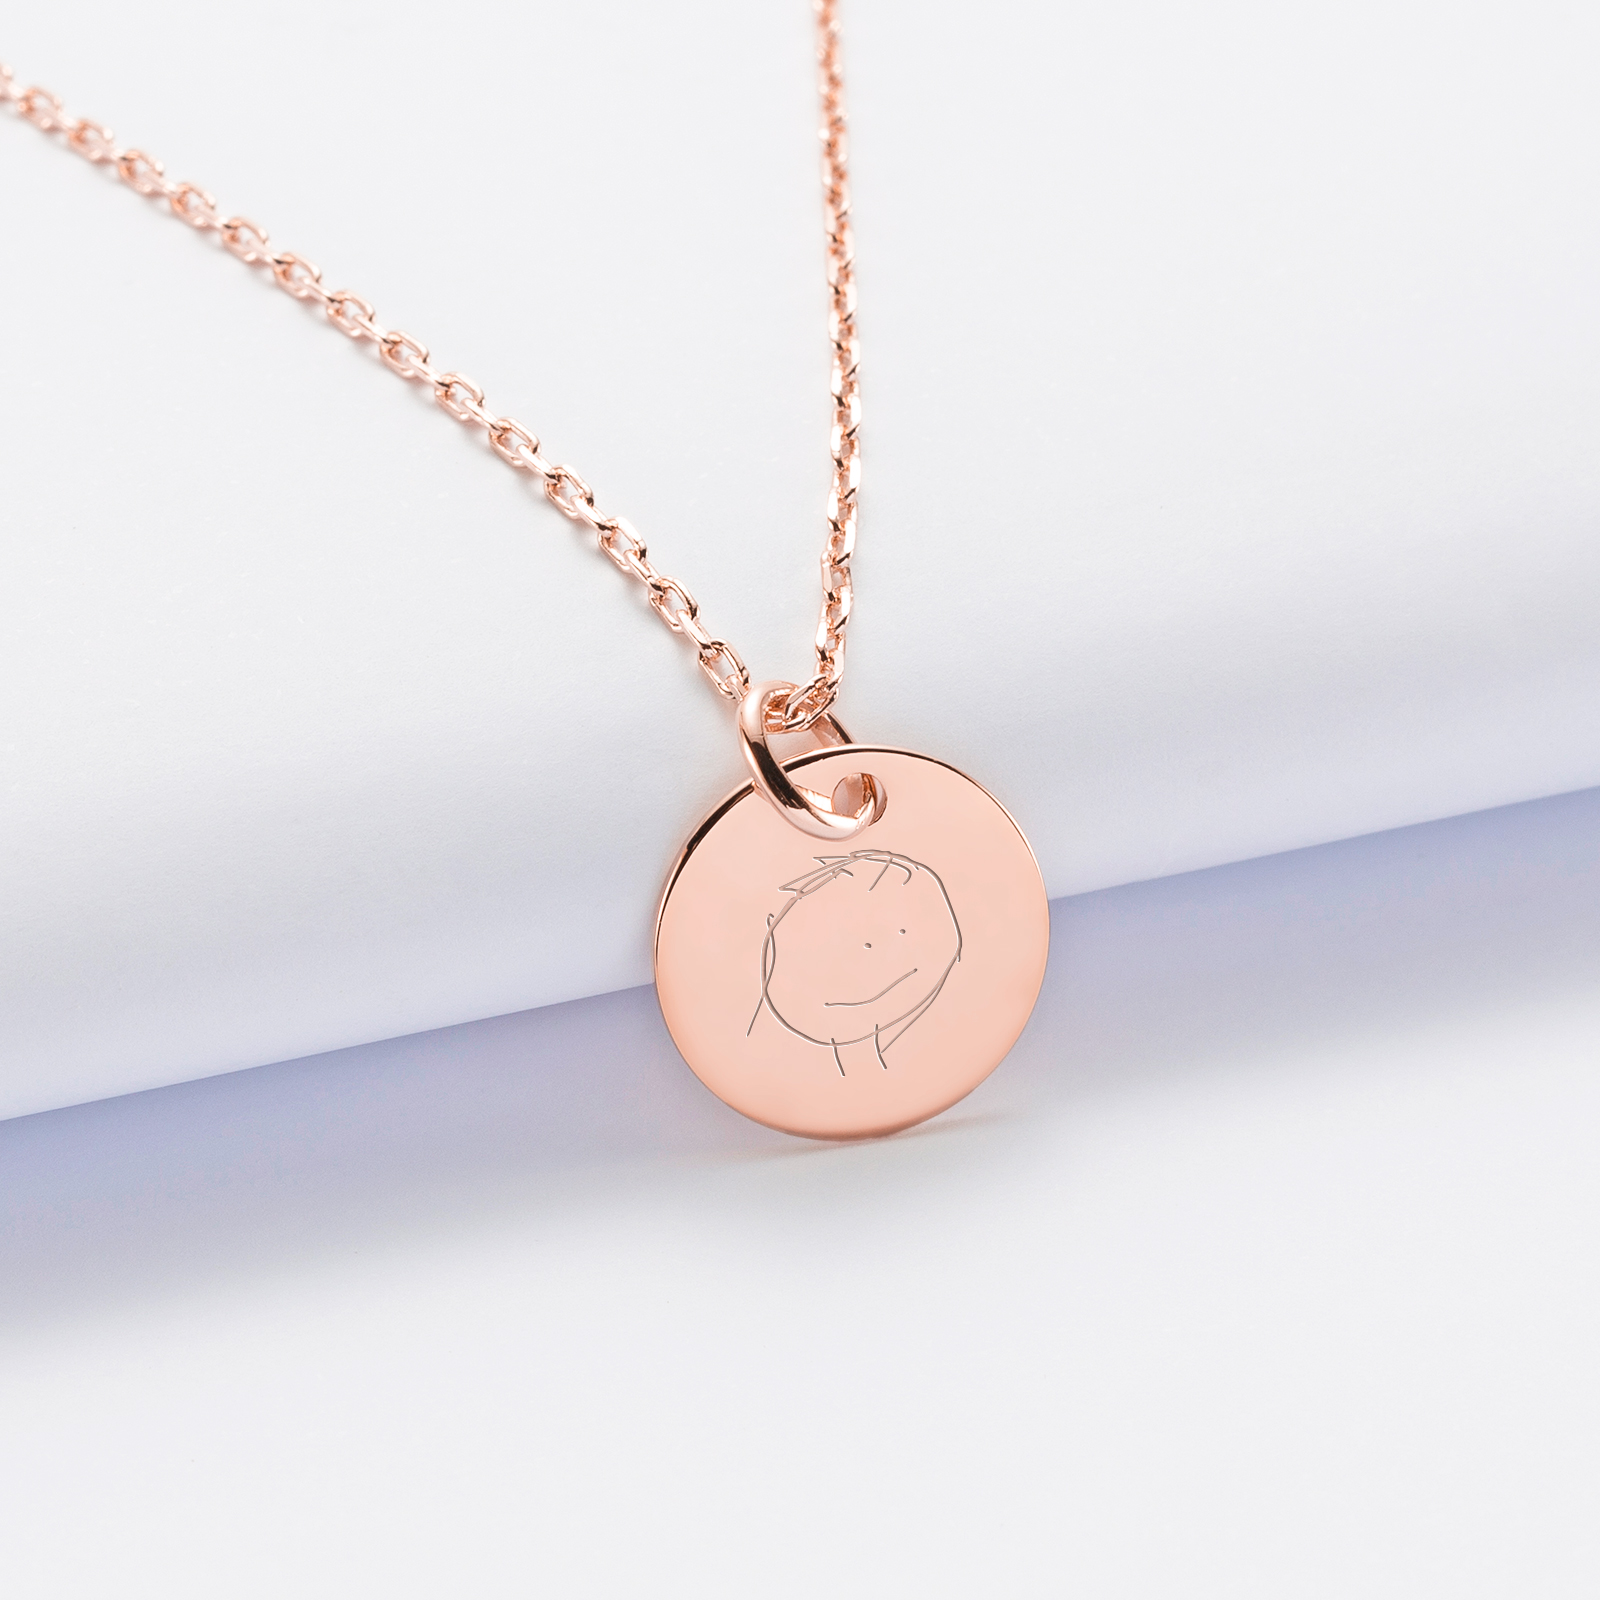 Personalised engraved rose gold plated medallion pendant 15 mm - sketch